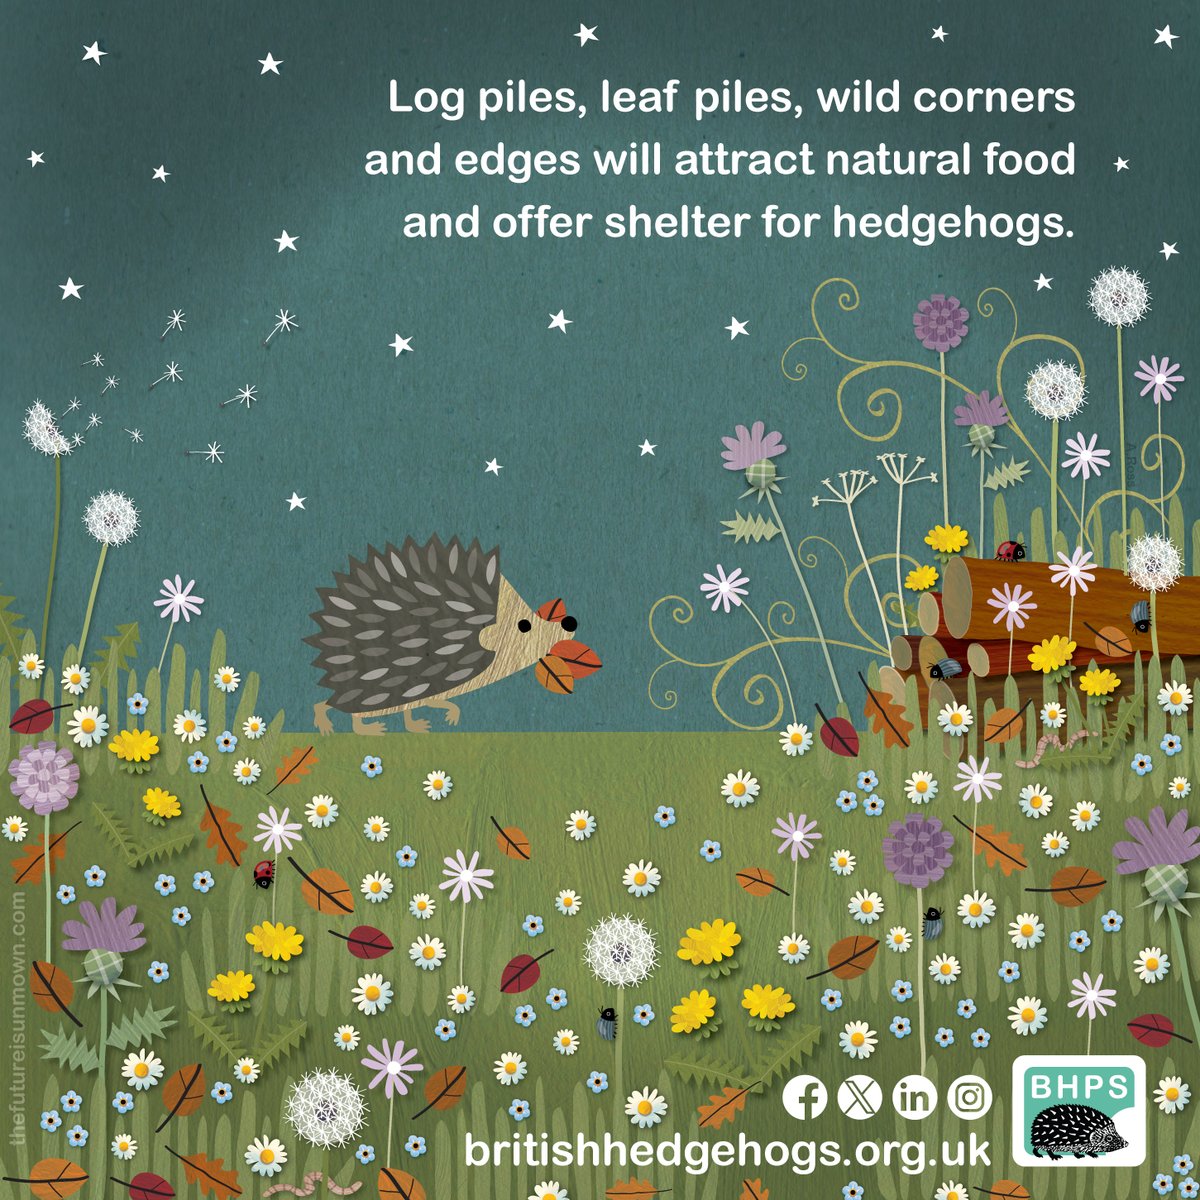 This year our #hedgehogweek theme is #welcomewildlife – so make space for #hedgehogs and do something good for #wildlife! Thanks to @TFIUnmown for donating this amazing infographic! Please #ShareToMakeAware